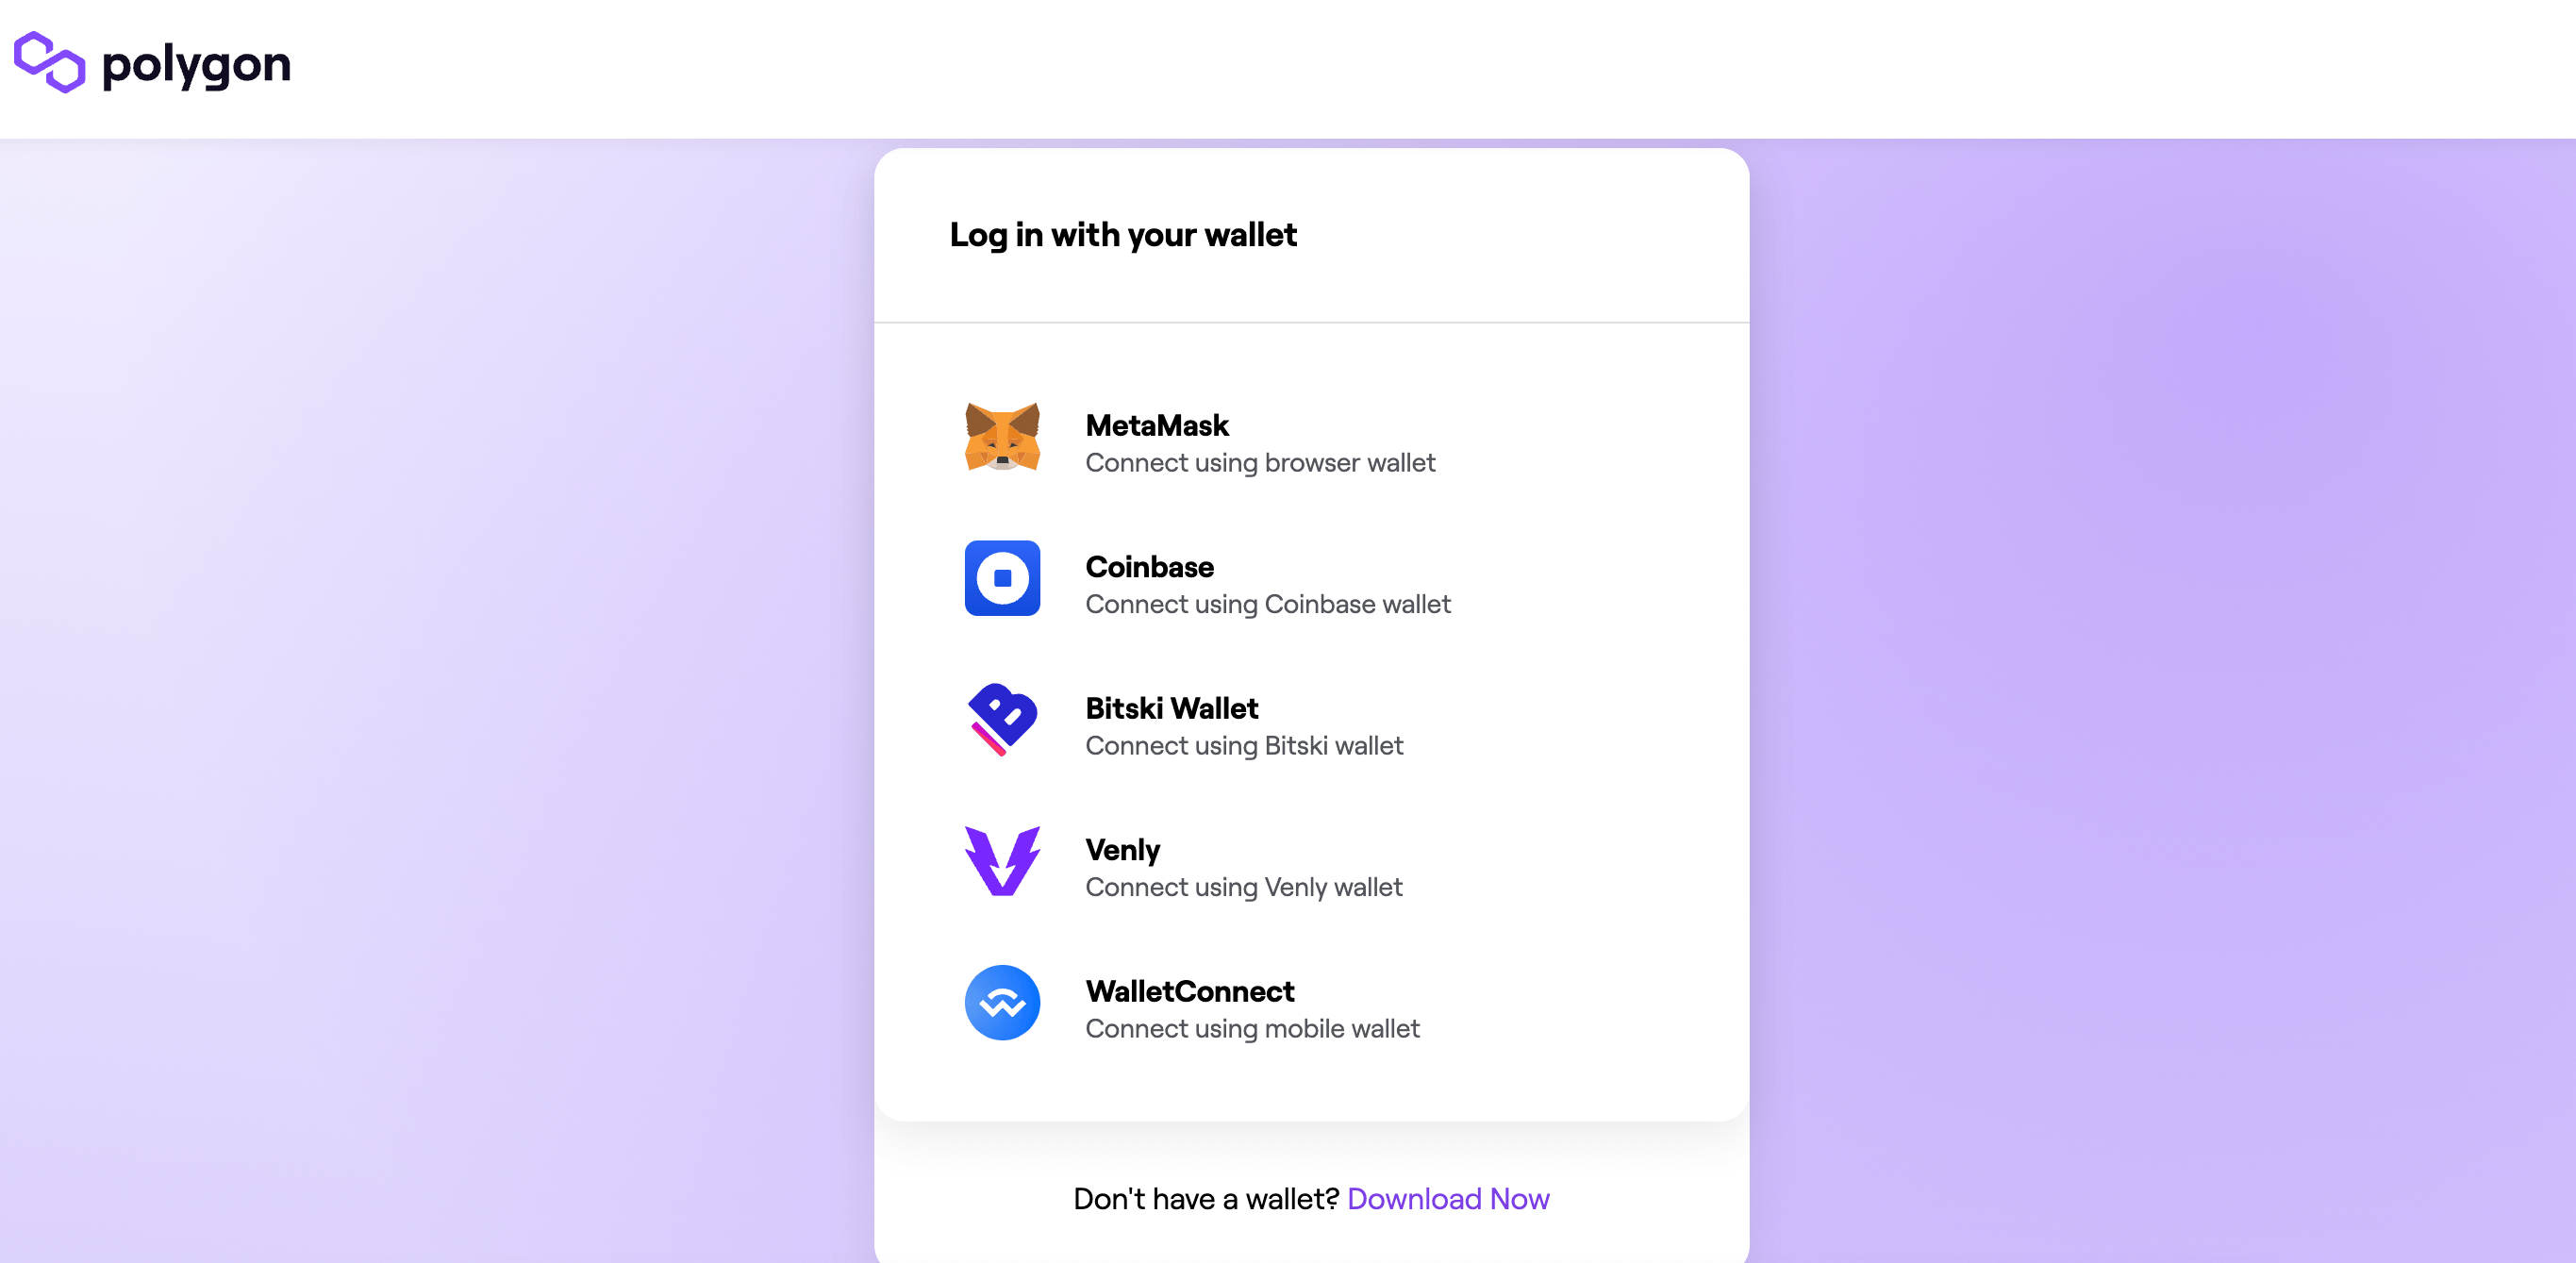 Download and set up your MetaMask wallet